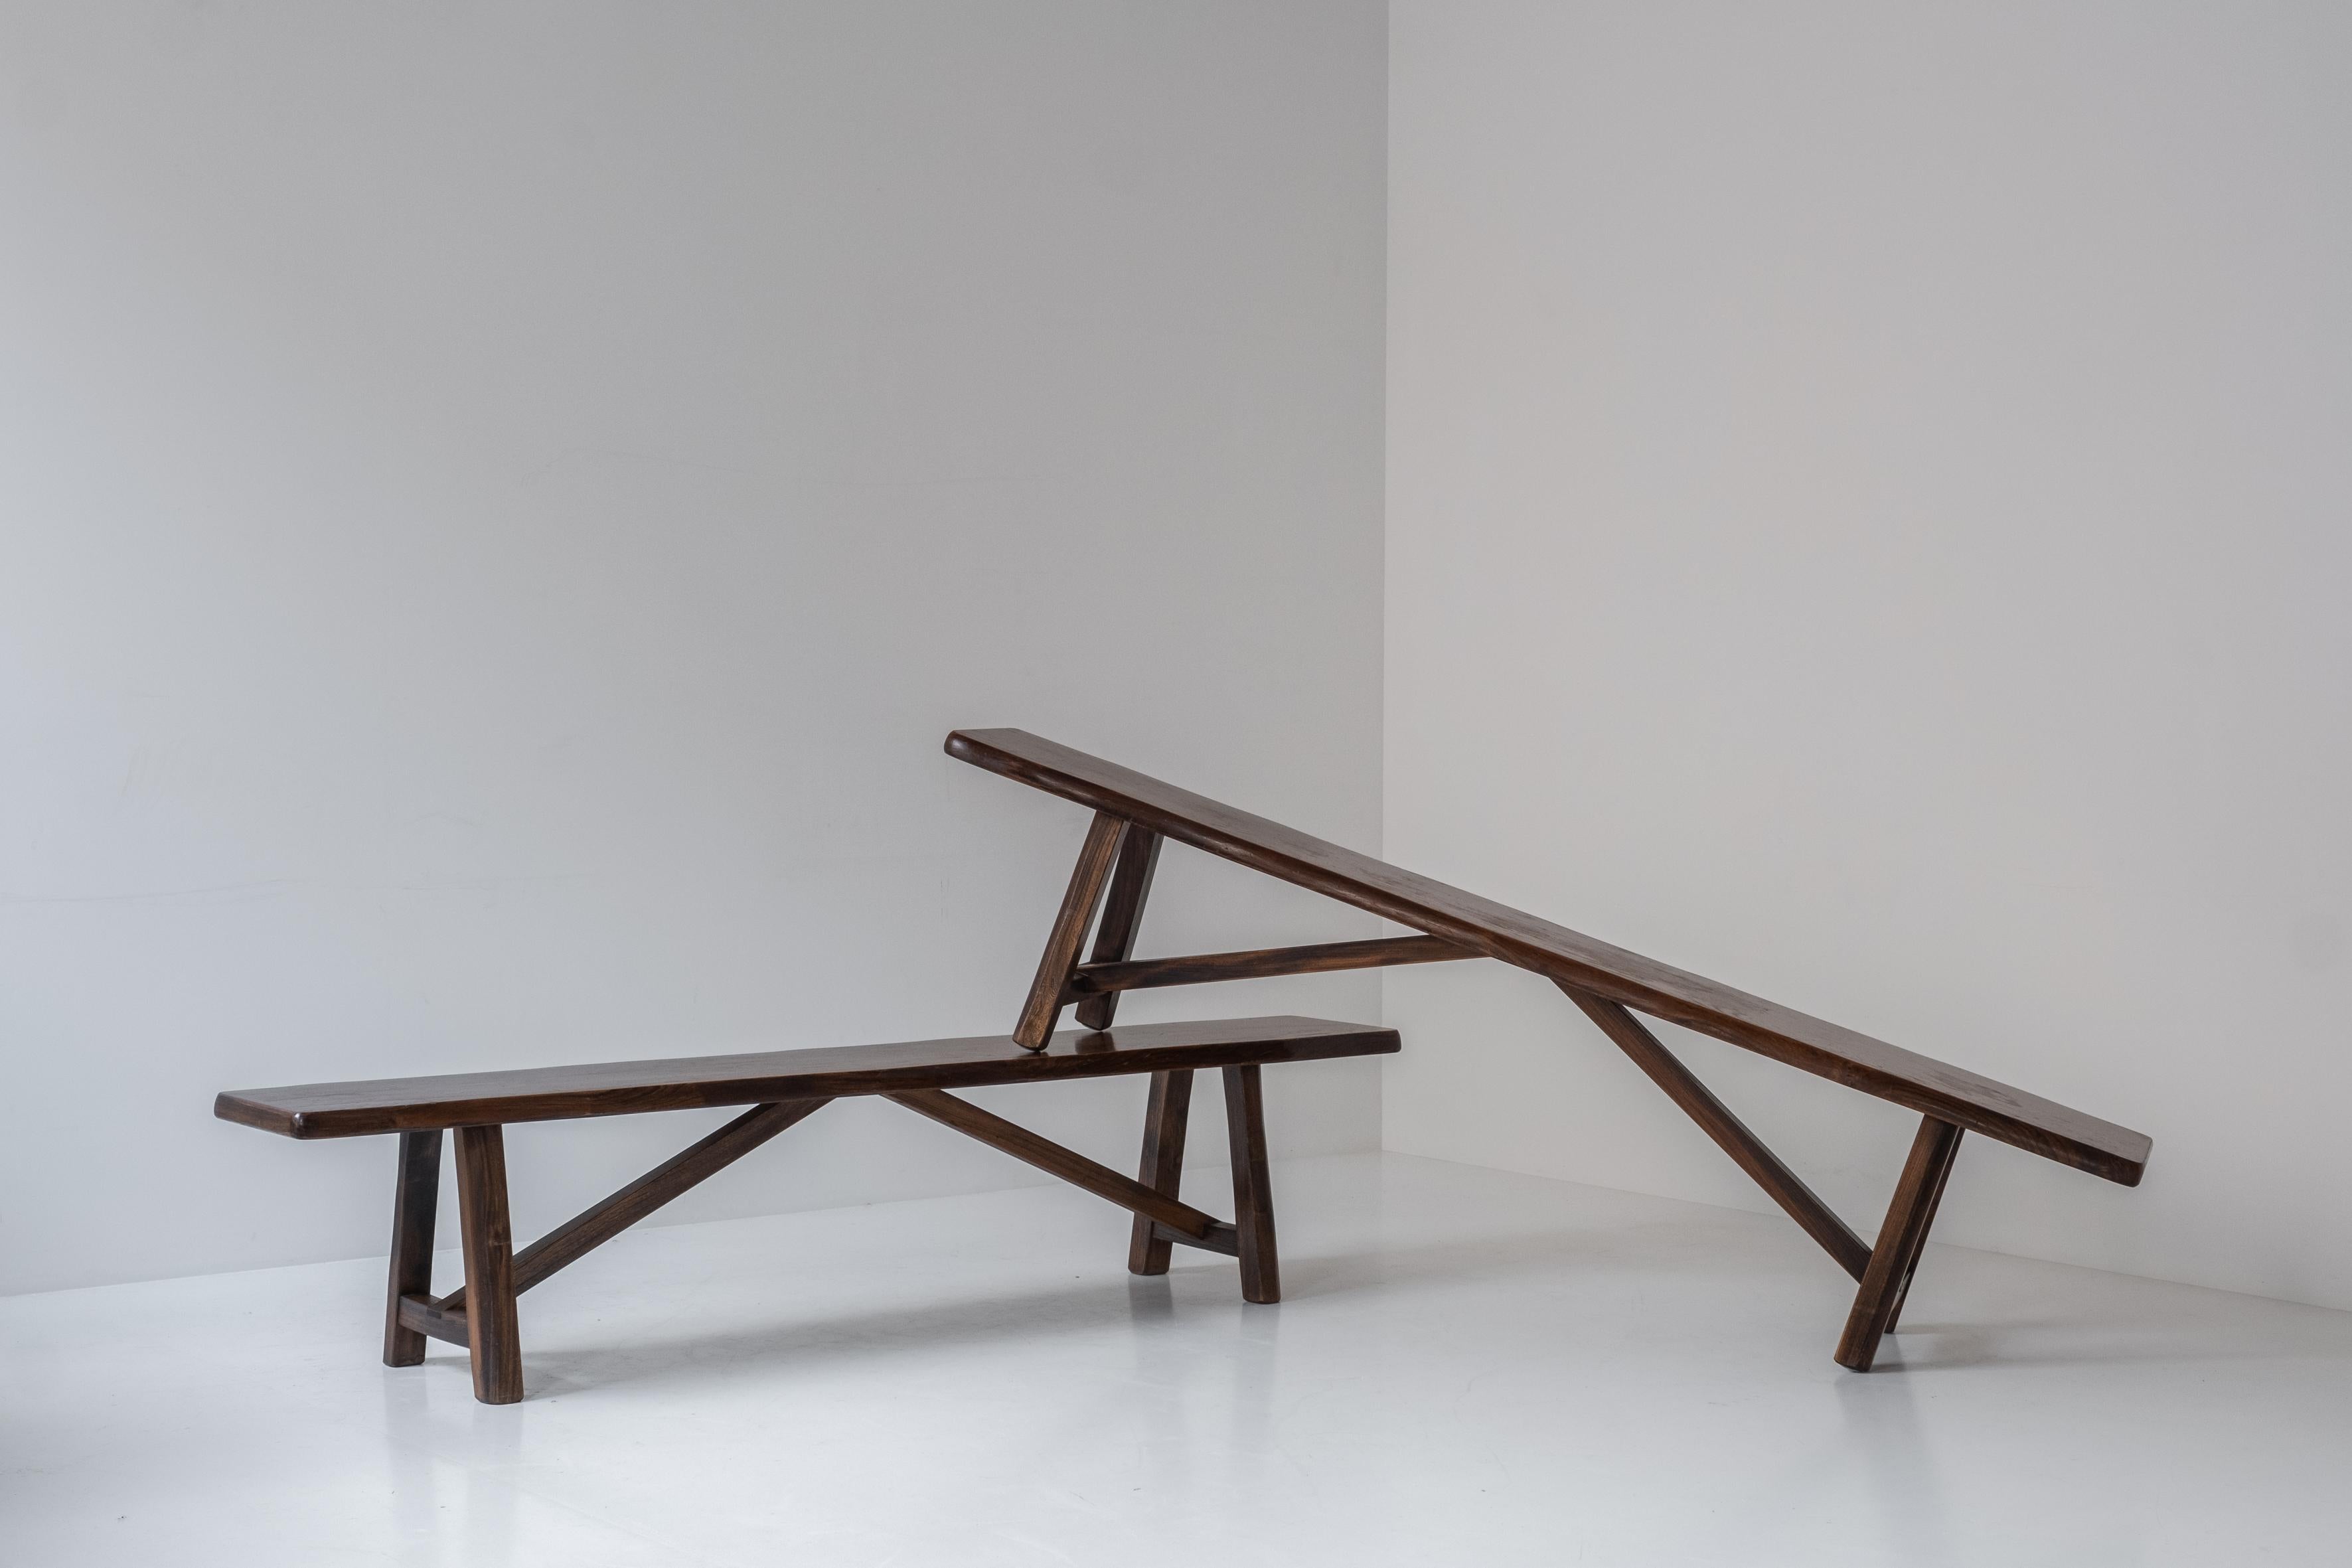 Sculptural bench by Olavi Hanninen for Mikko Nupponen, Finland 1950’s. This bench is made of stained elm wood and sculpturally crafted by hand. Presented in a good, original, condition. We have two identical pieces available. Sold and priced per